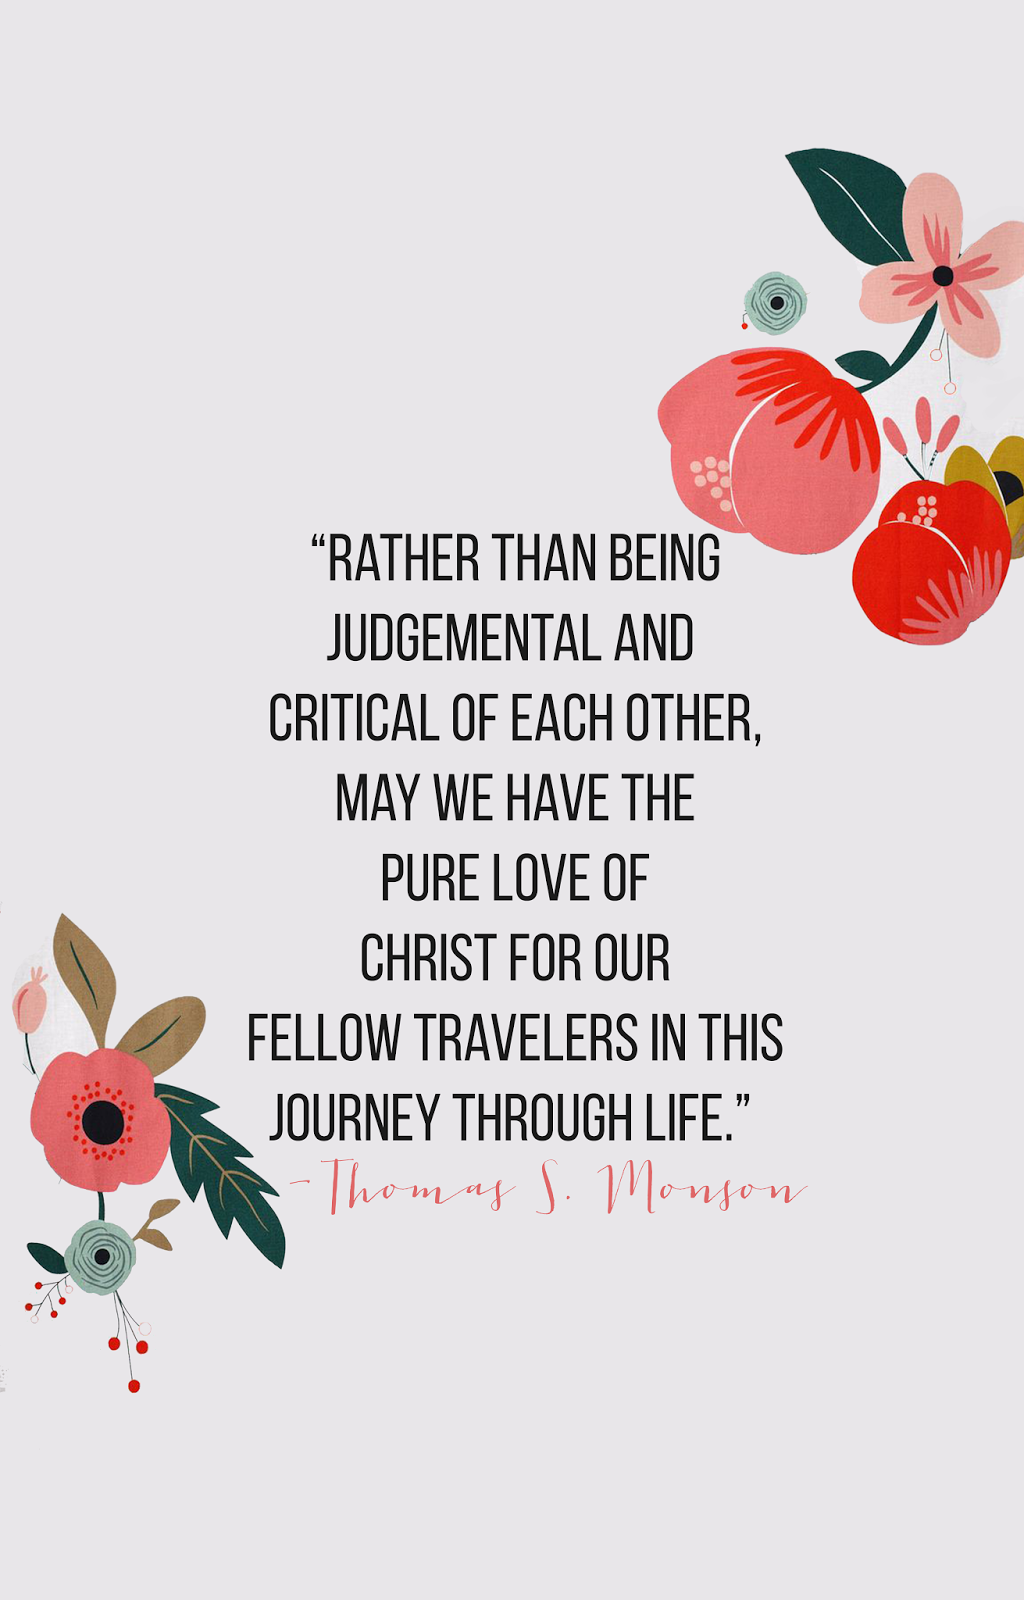 “rather than being judgemental and critical of each other, may we have the pure love of christ for our fellow travelers in this